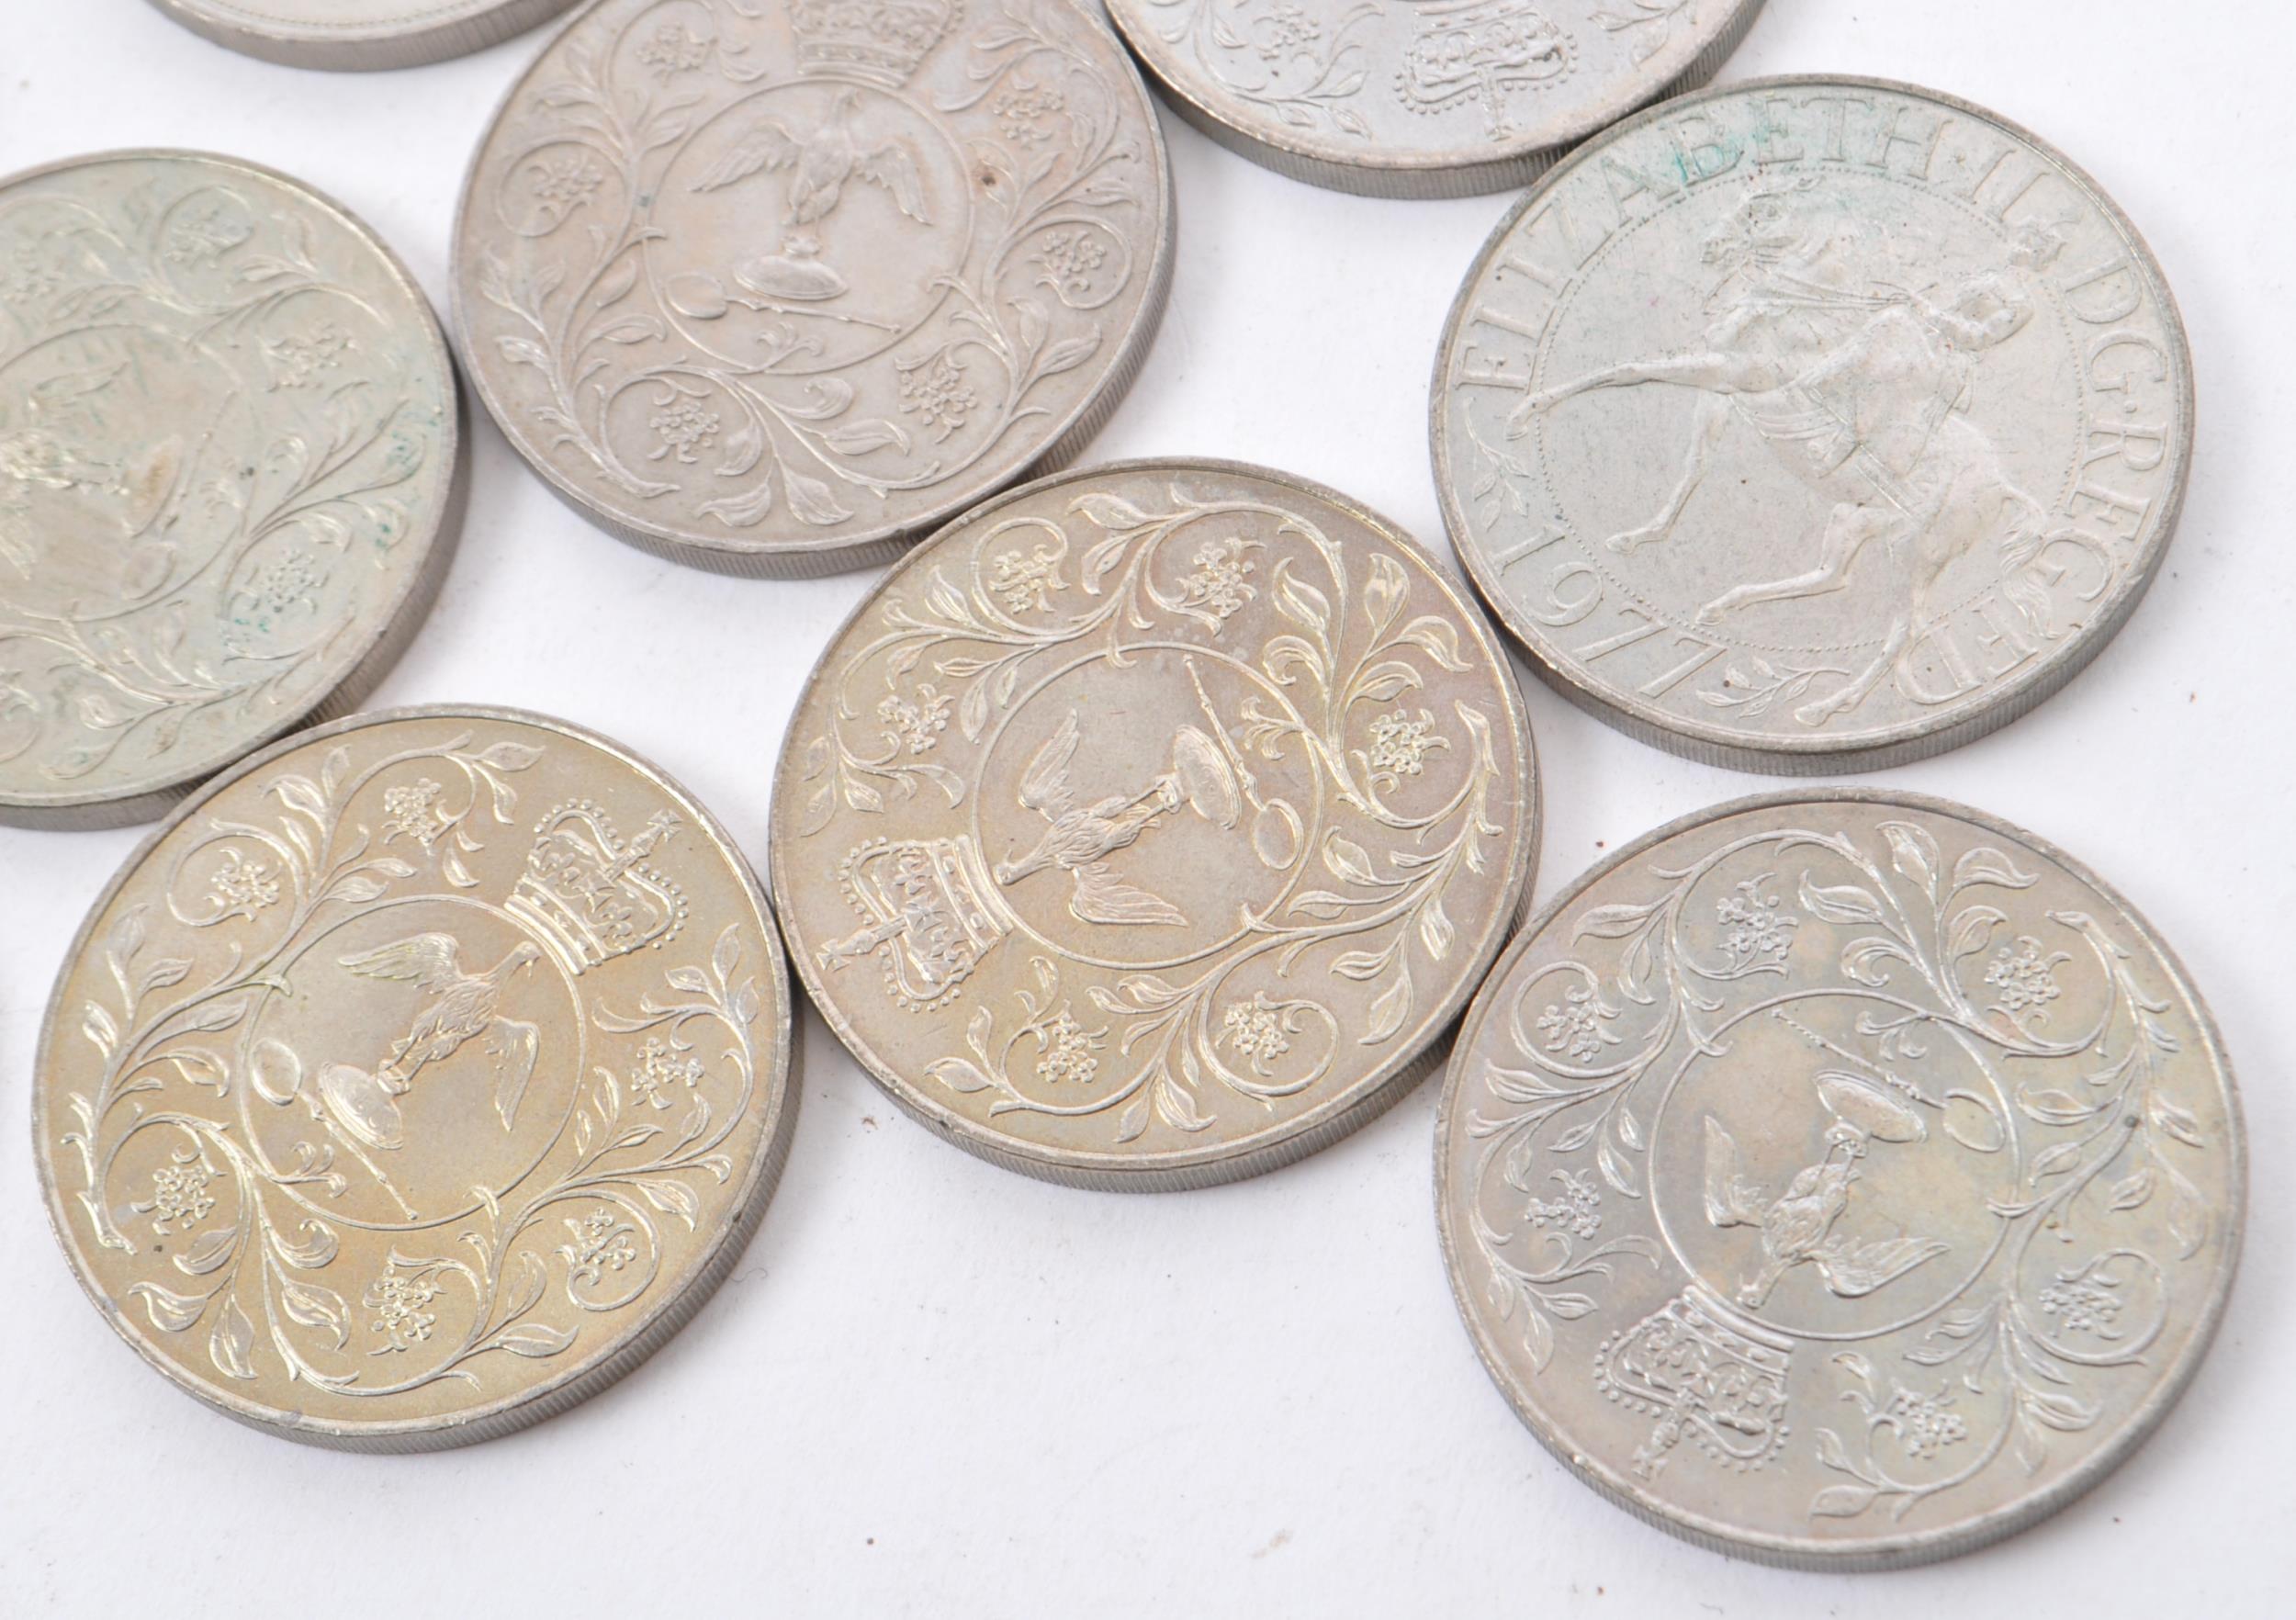 COLLECTION OF 24 X BRITISH CURRENCY 'CROWNS' COINAGE - Image 2 of 11